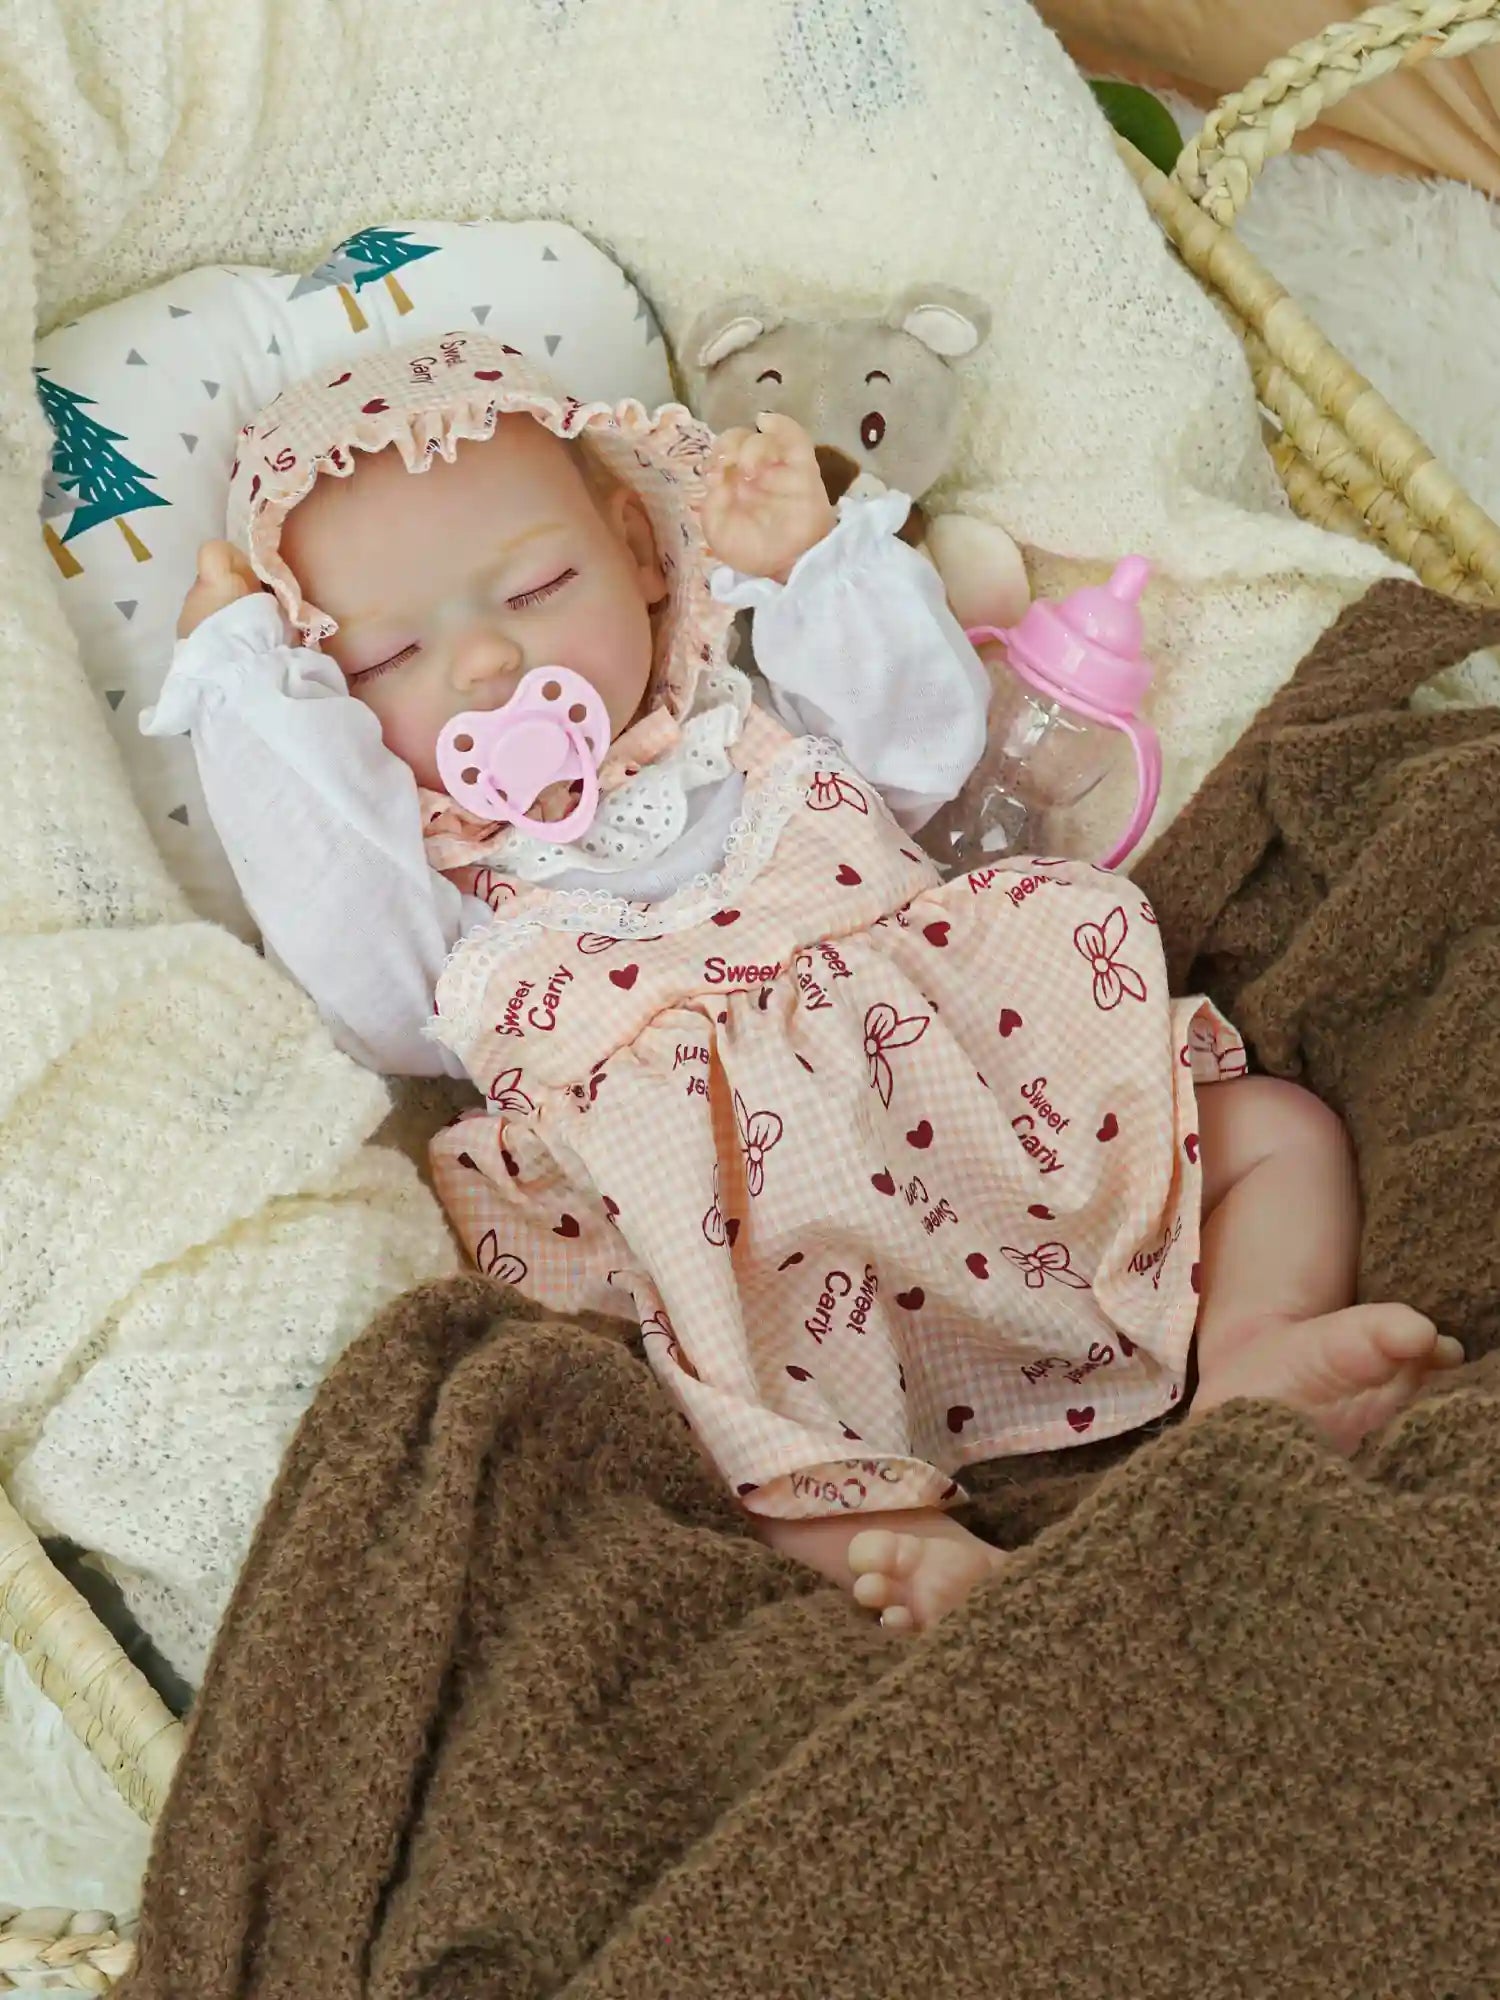 This image shows a reborn doll resting on a layered blanket, wearing a pink bonnet and a dress with red hearts, with a pink baby bottle and a gray teddy bear nearby.